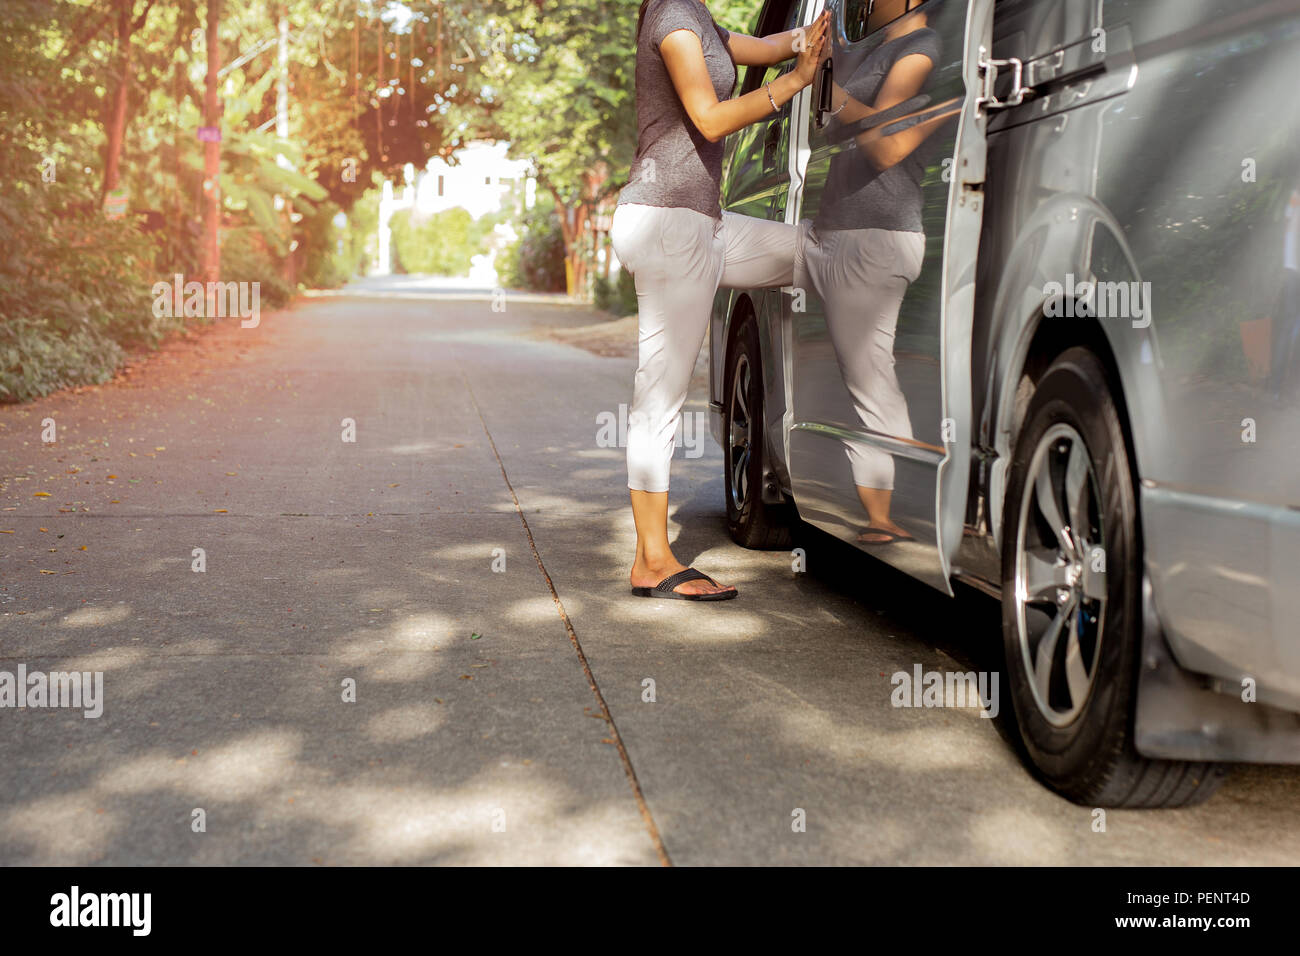 Woman passenger wearing flip flops getting on the bus on vacation. Stock Photo